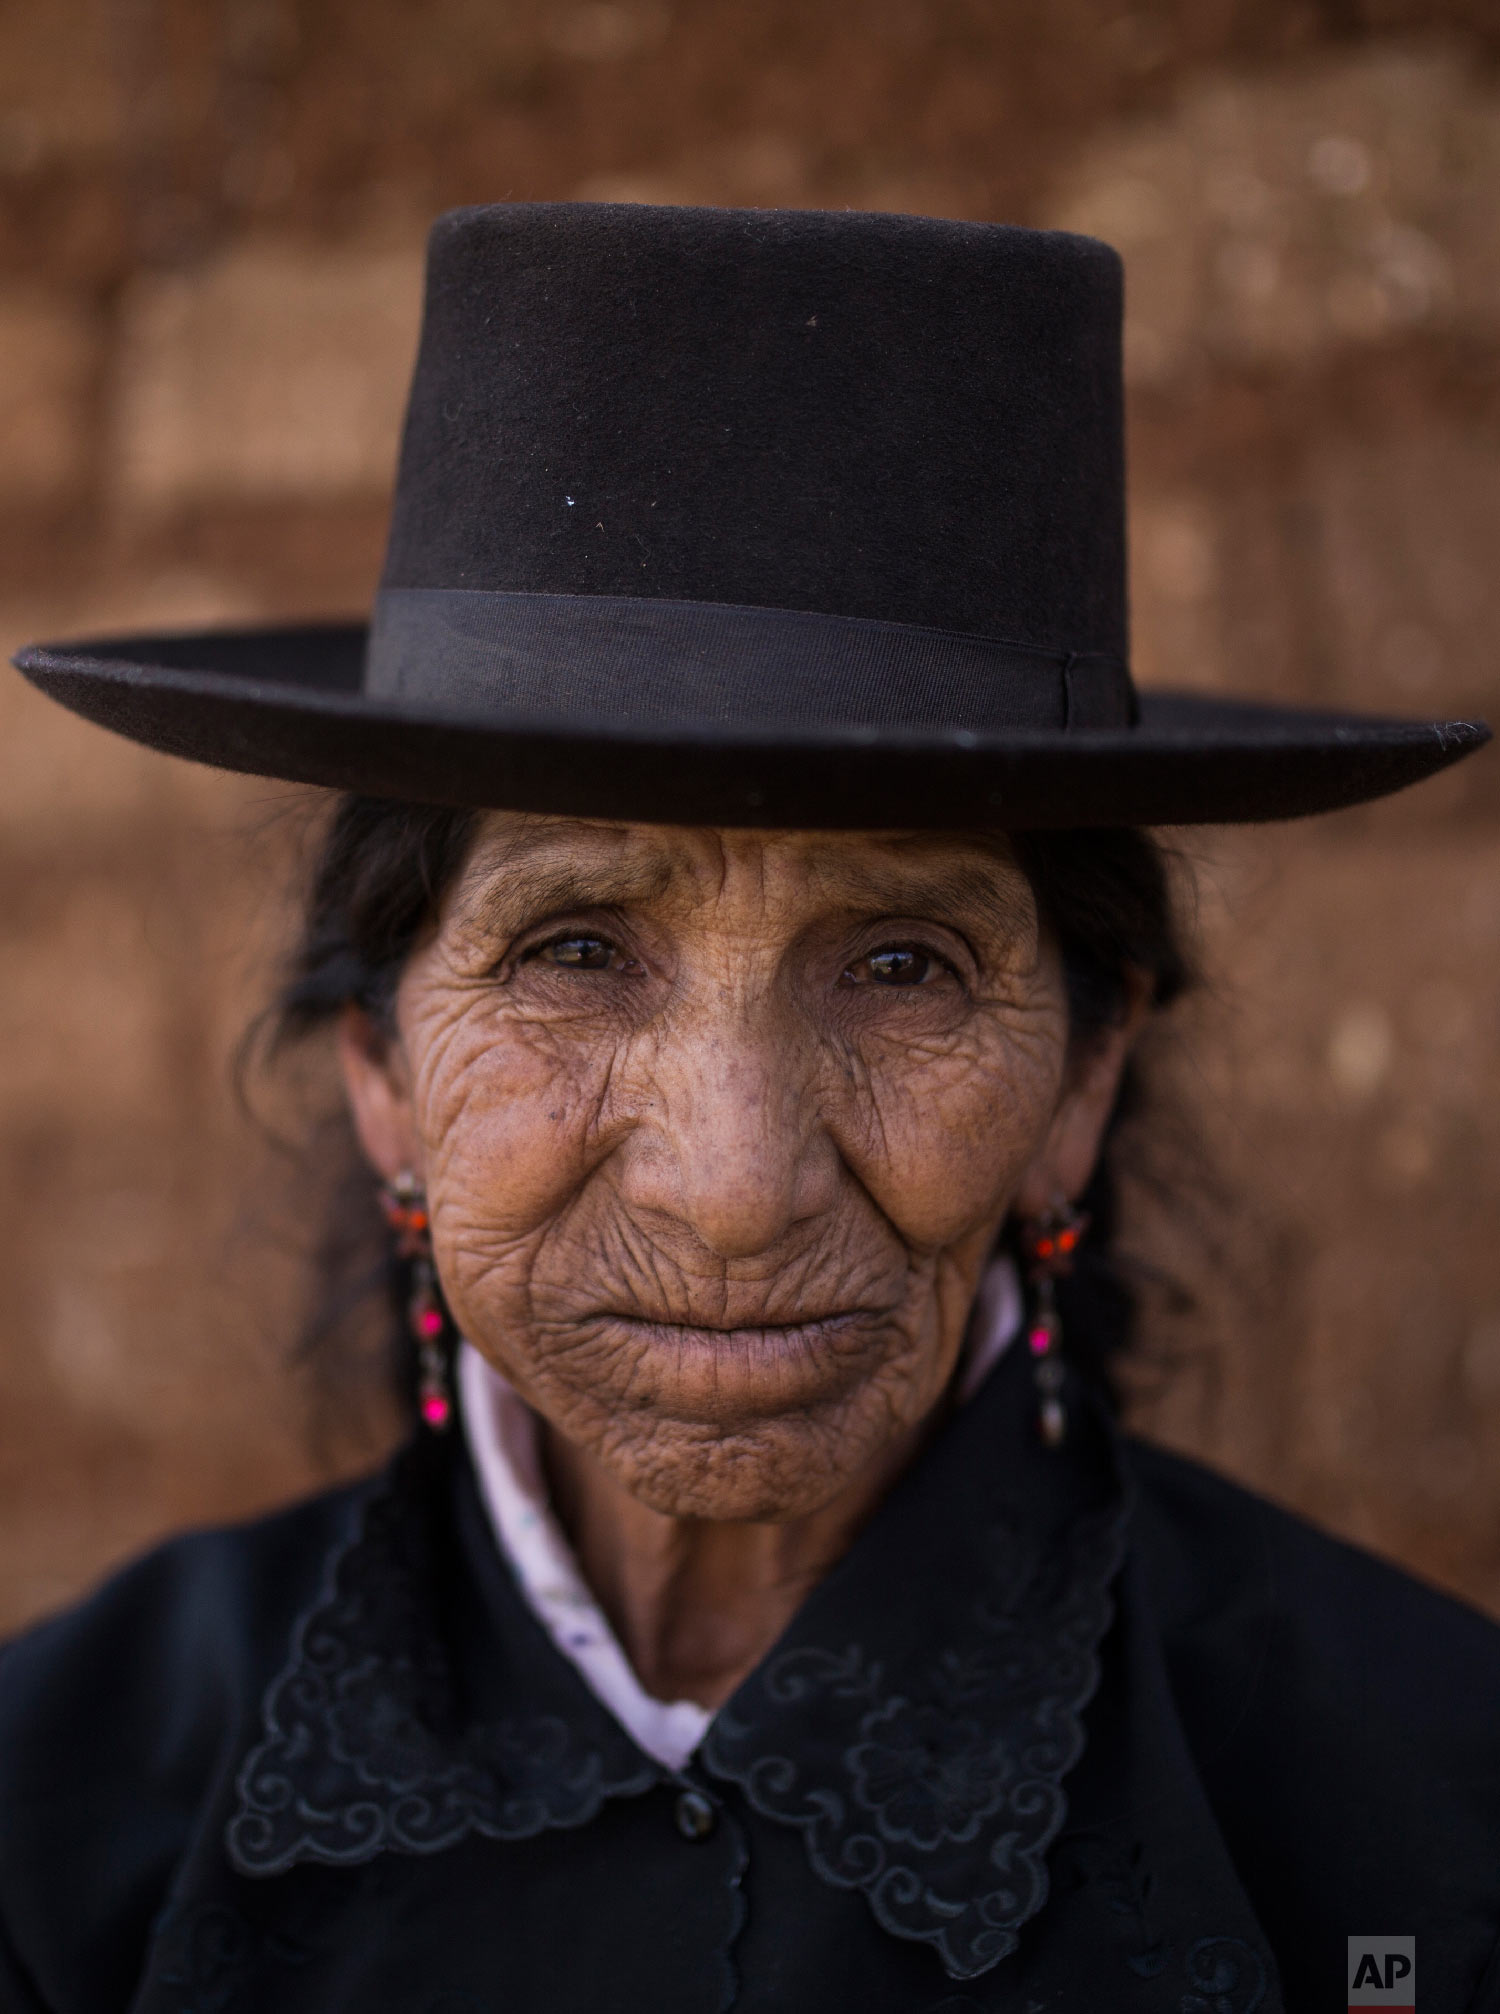  In this Aug. 15, 2018 photo, Maria Magdalena Espinosa, whose husband Daniel Tineo was  killed by the Shining Path guerrillas in 1984, poses for a portrait outside her home in Tantana, in Peru's Ayacucho province. (AP Photo/Rodrigo Abd) 